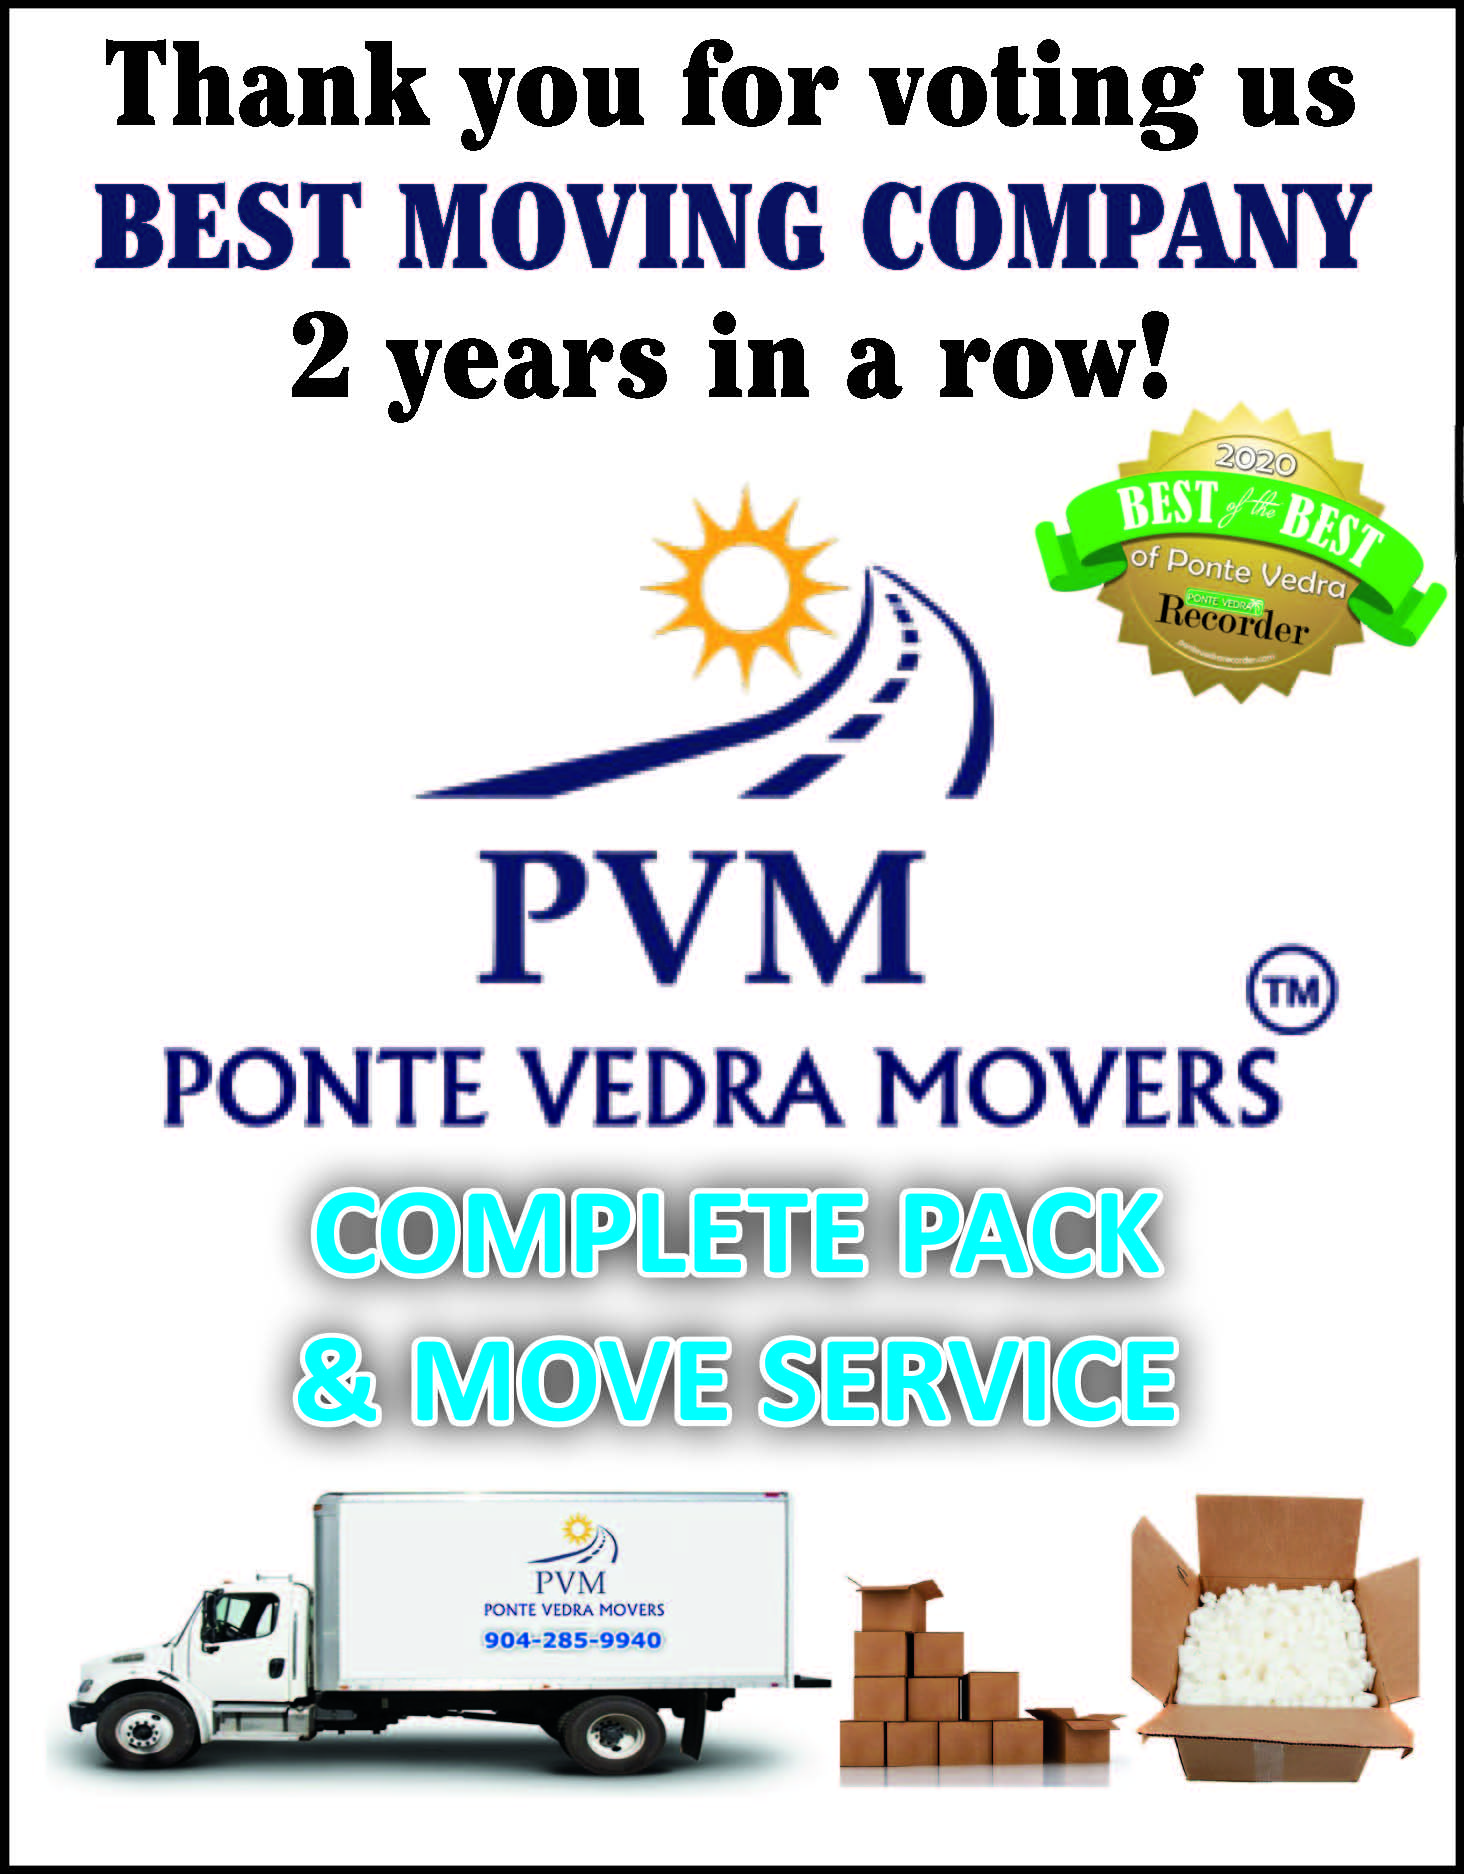 Best Moving Company 2 years in a row